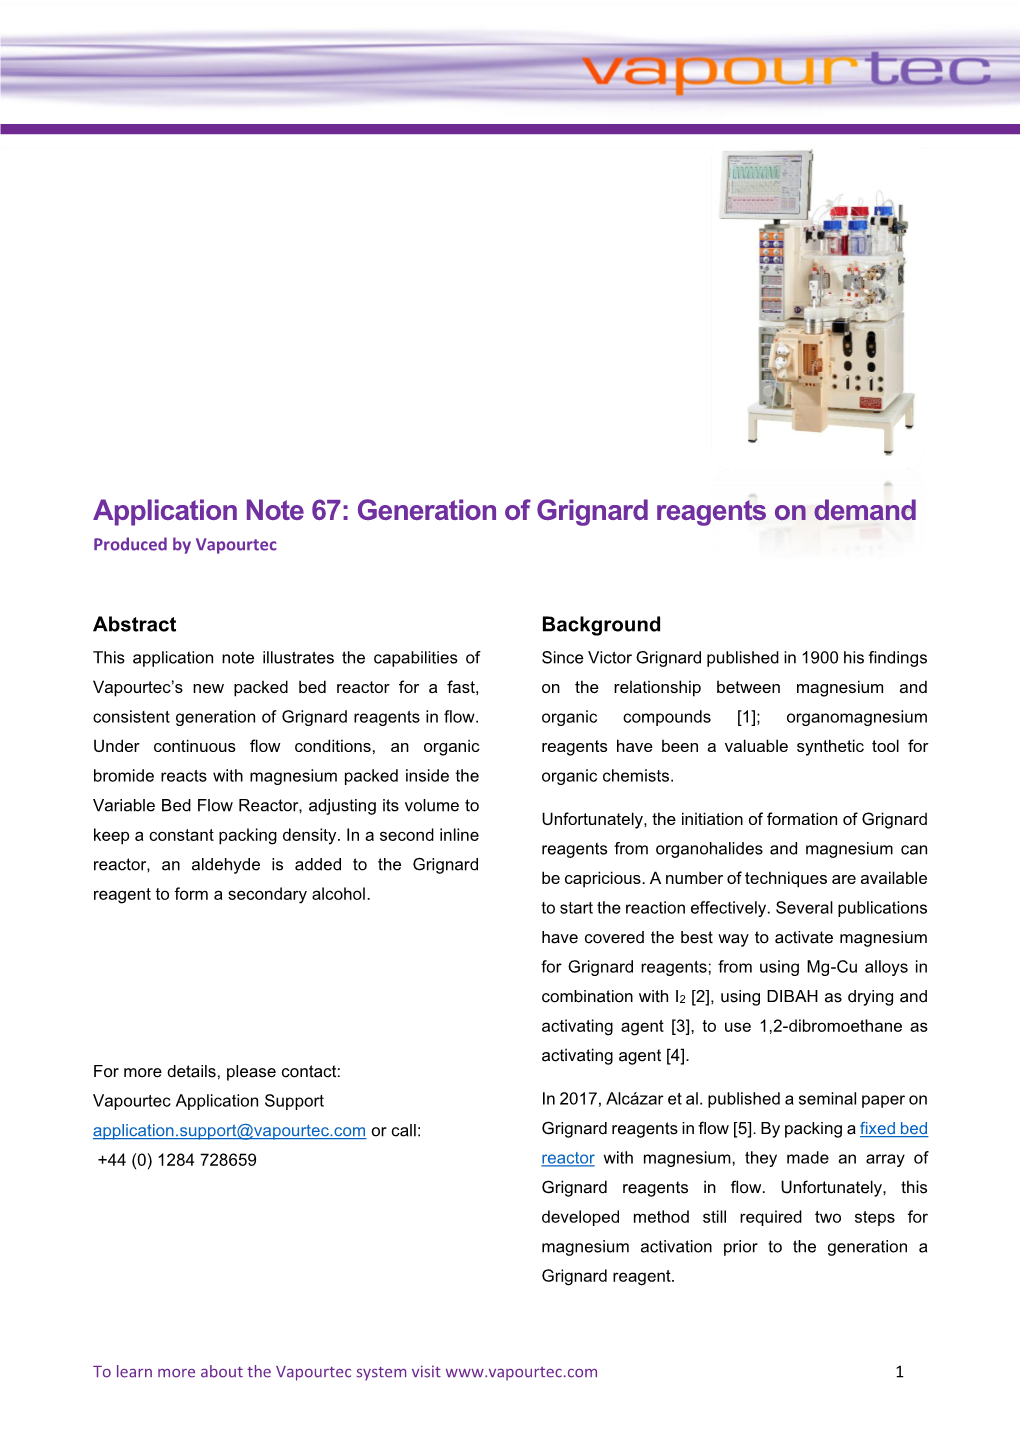 Application Note 67: Generation of Grignard Reagents on Demand Produced by Vapourtec